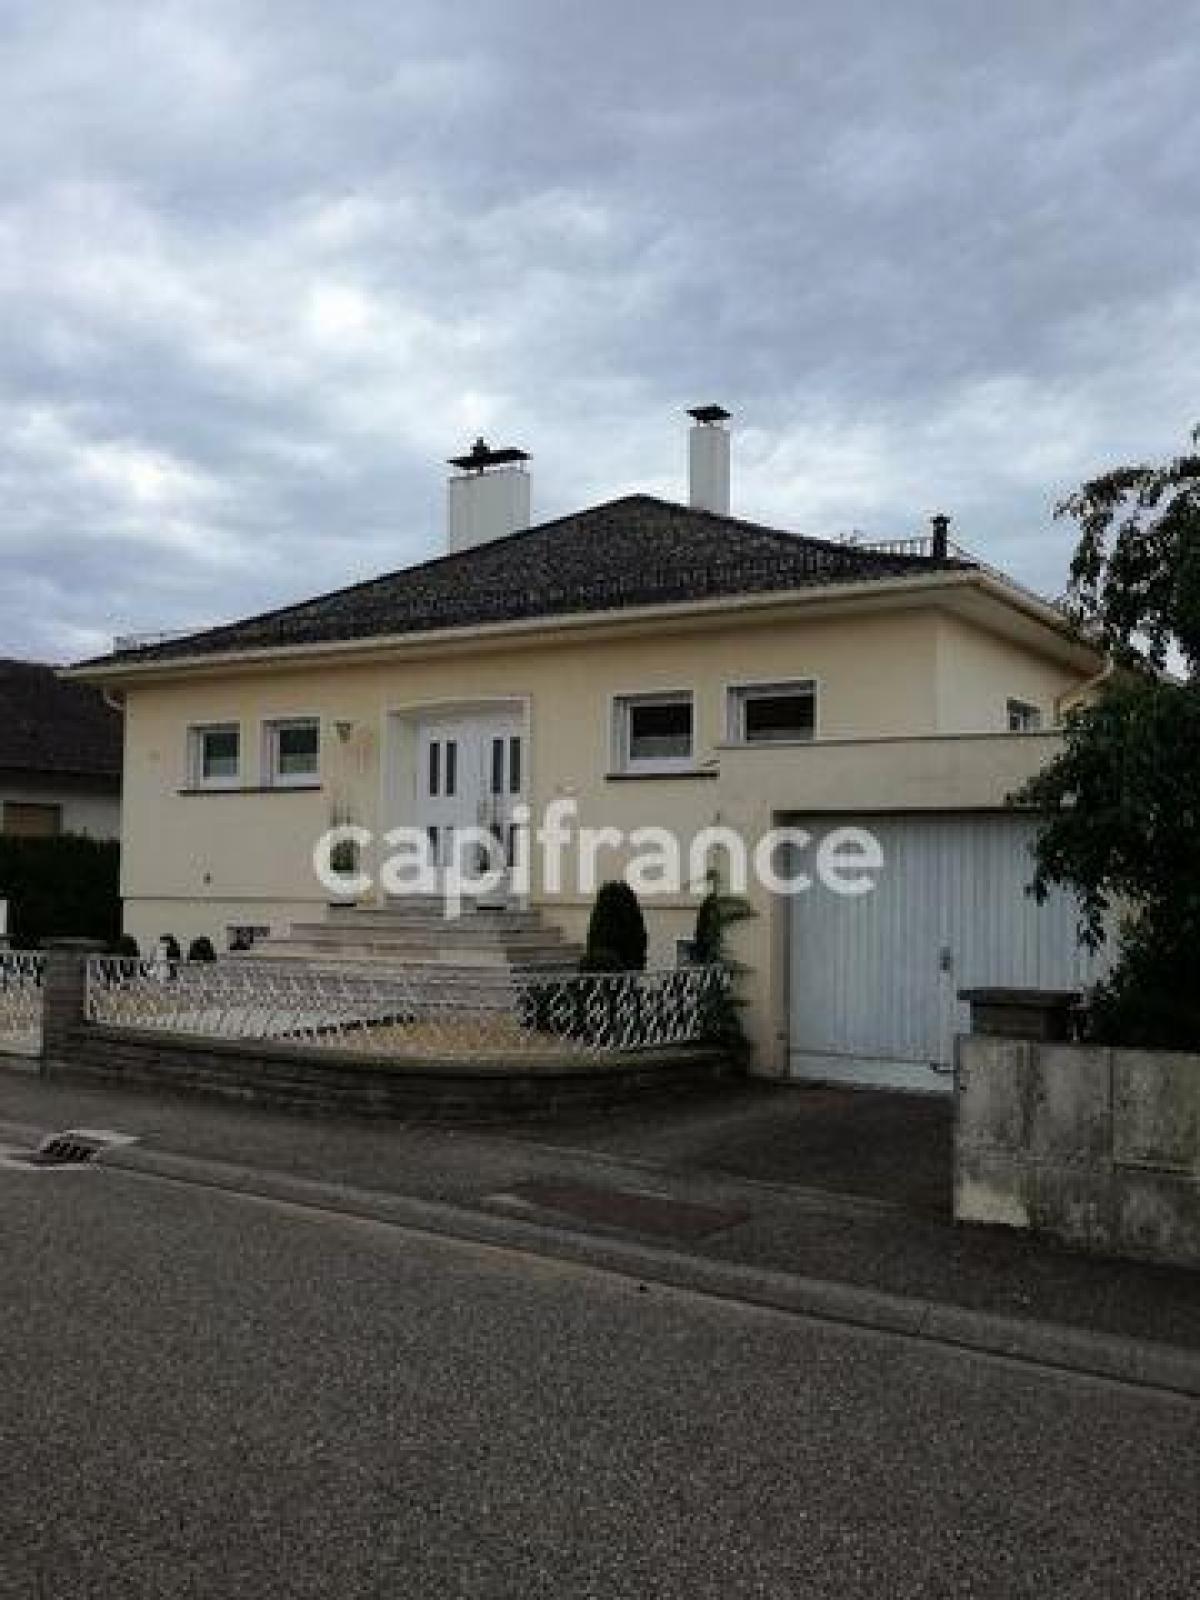 Picture of Home For Sale in Bitche, Lorraine, France